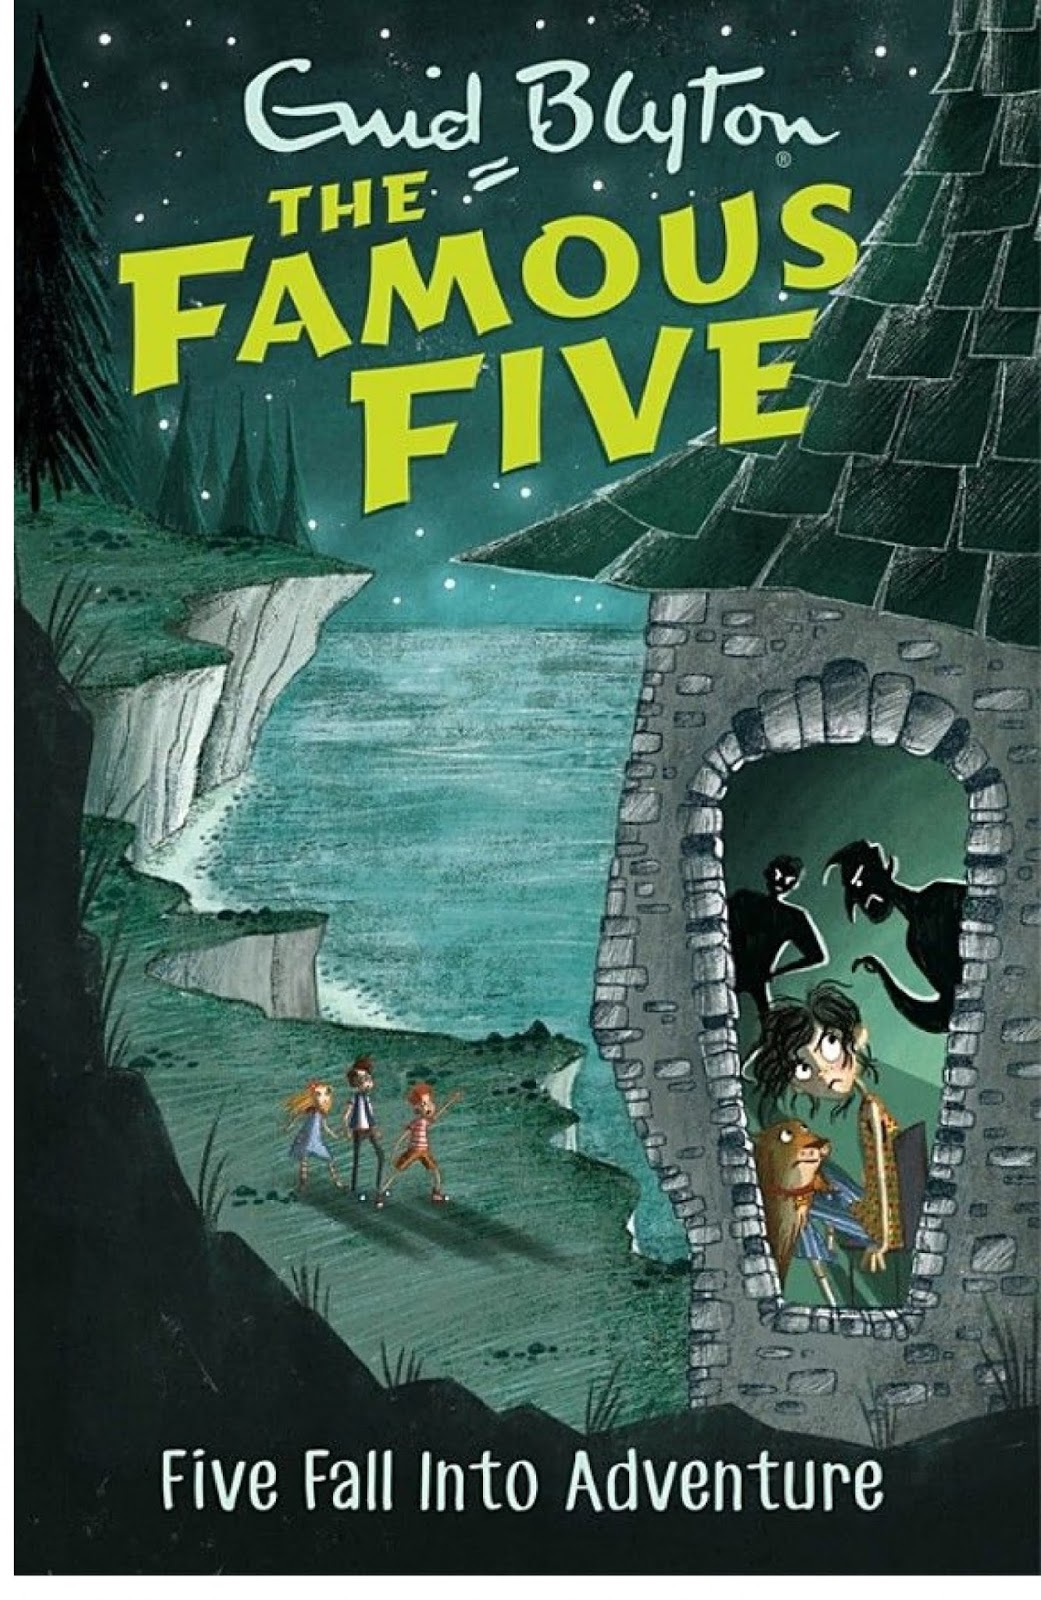 book review of famous five